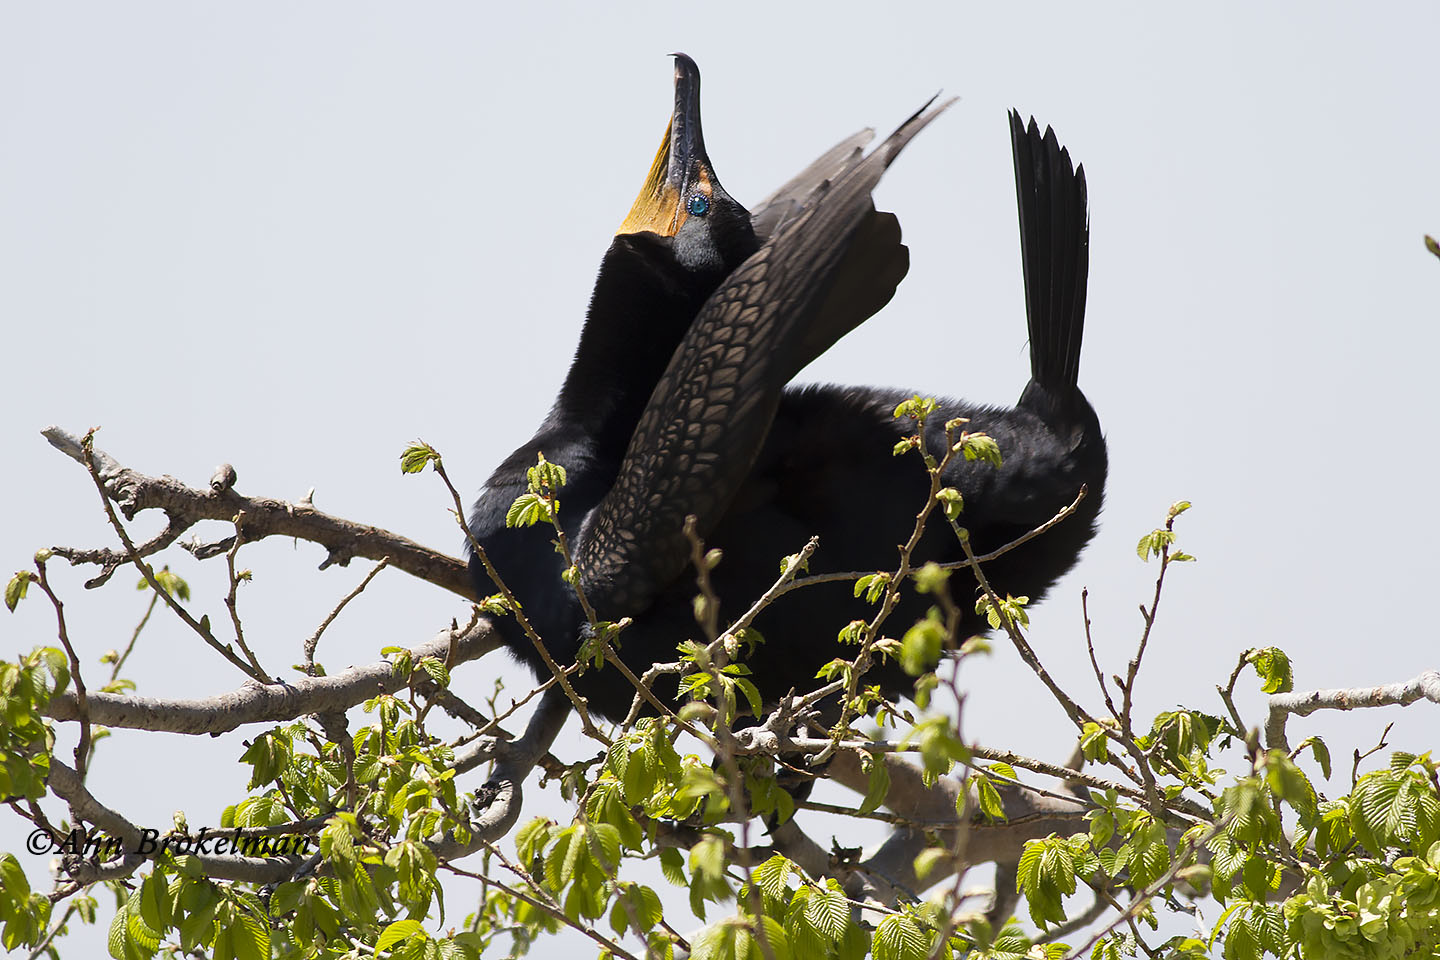 Double-crested Cormorant calling to mate